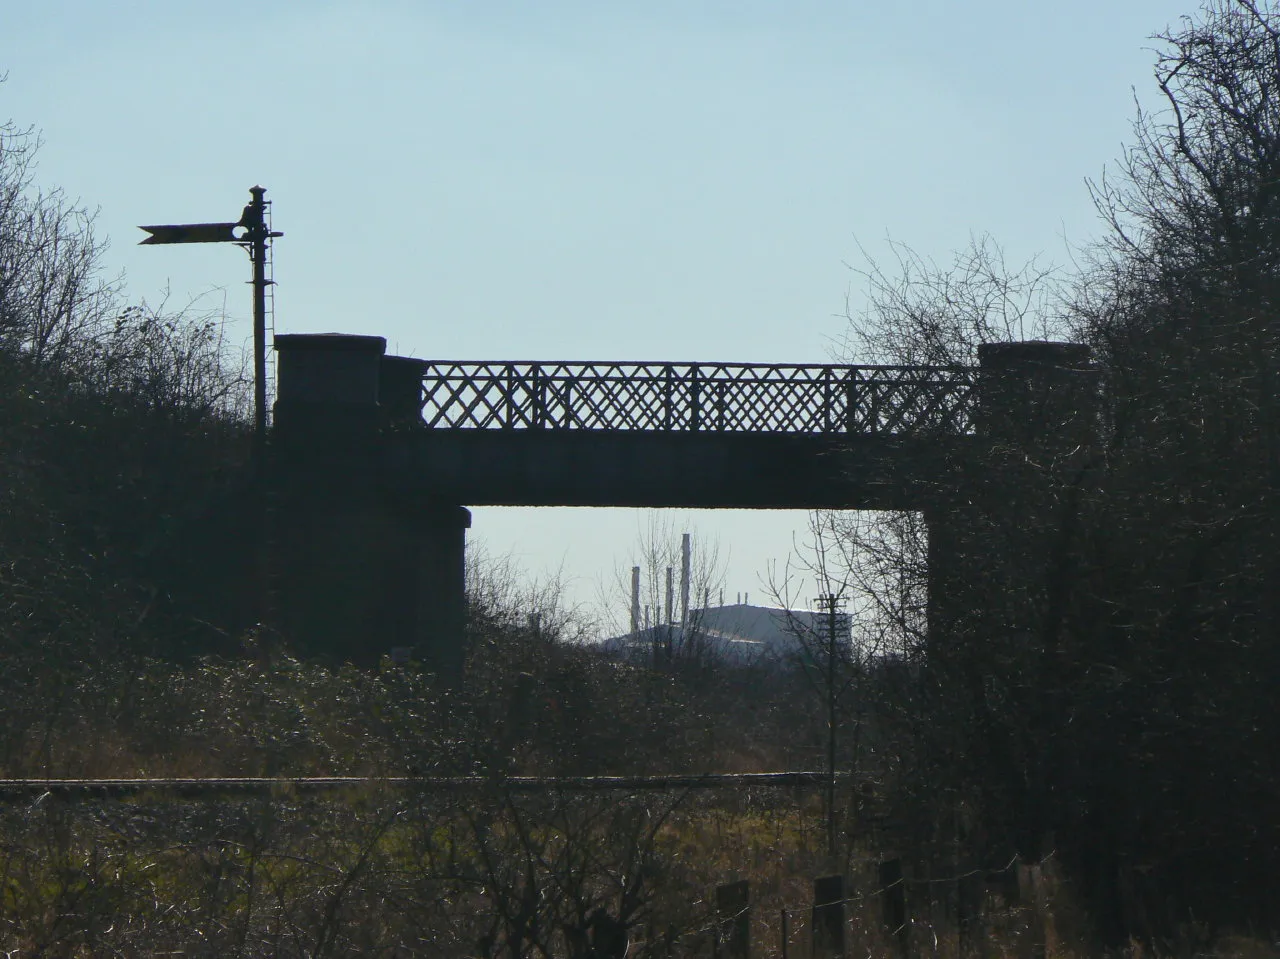 Photo showing: Accommodation bridge Built across the Great Central Railway to connect the farmland on both sides, it is now disused. The lattice parapets are a feature of the GCR bridges.